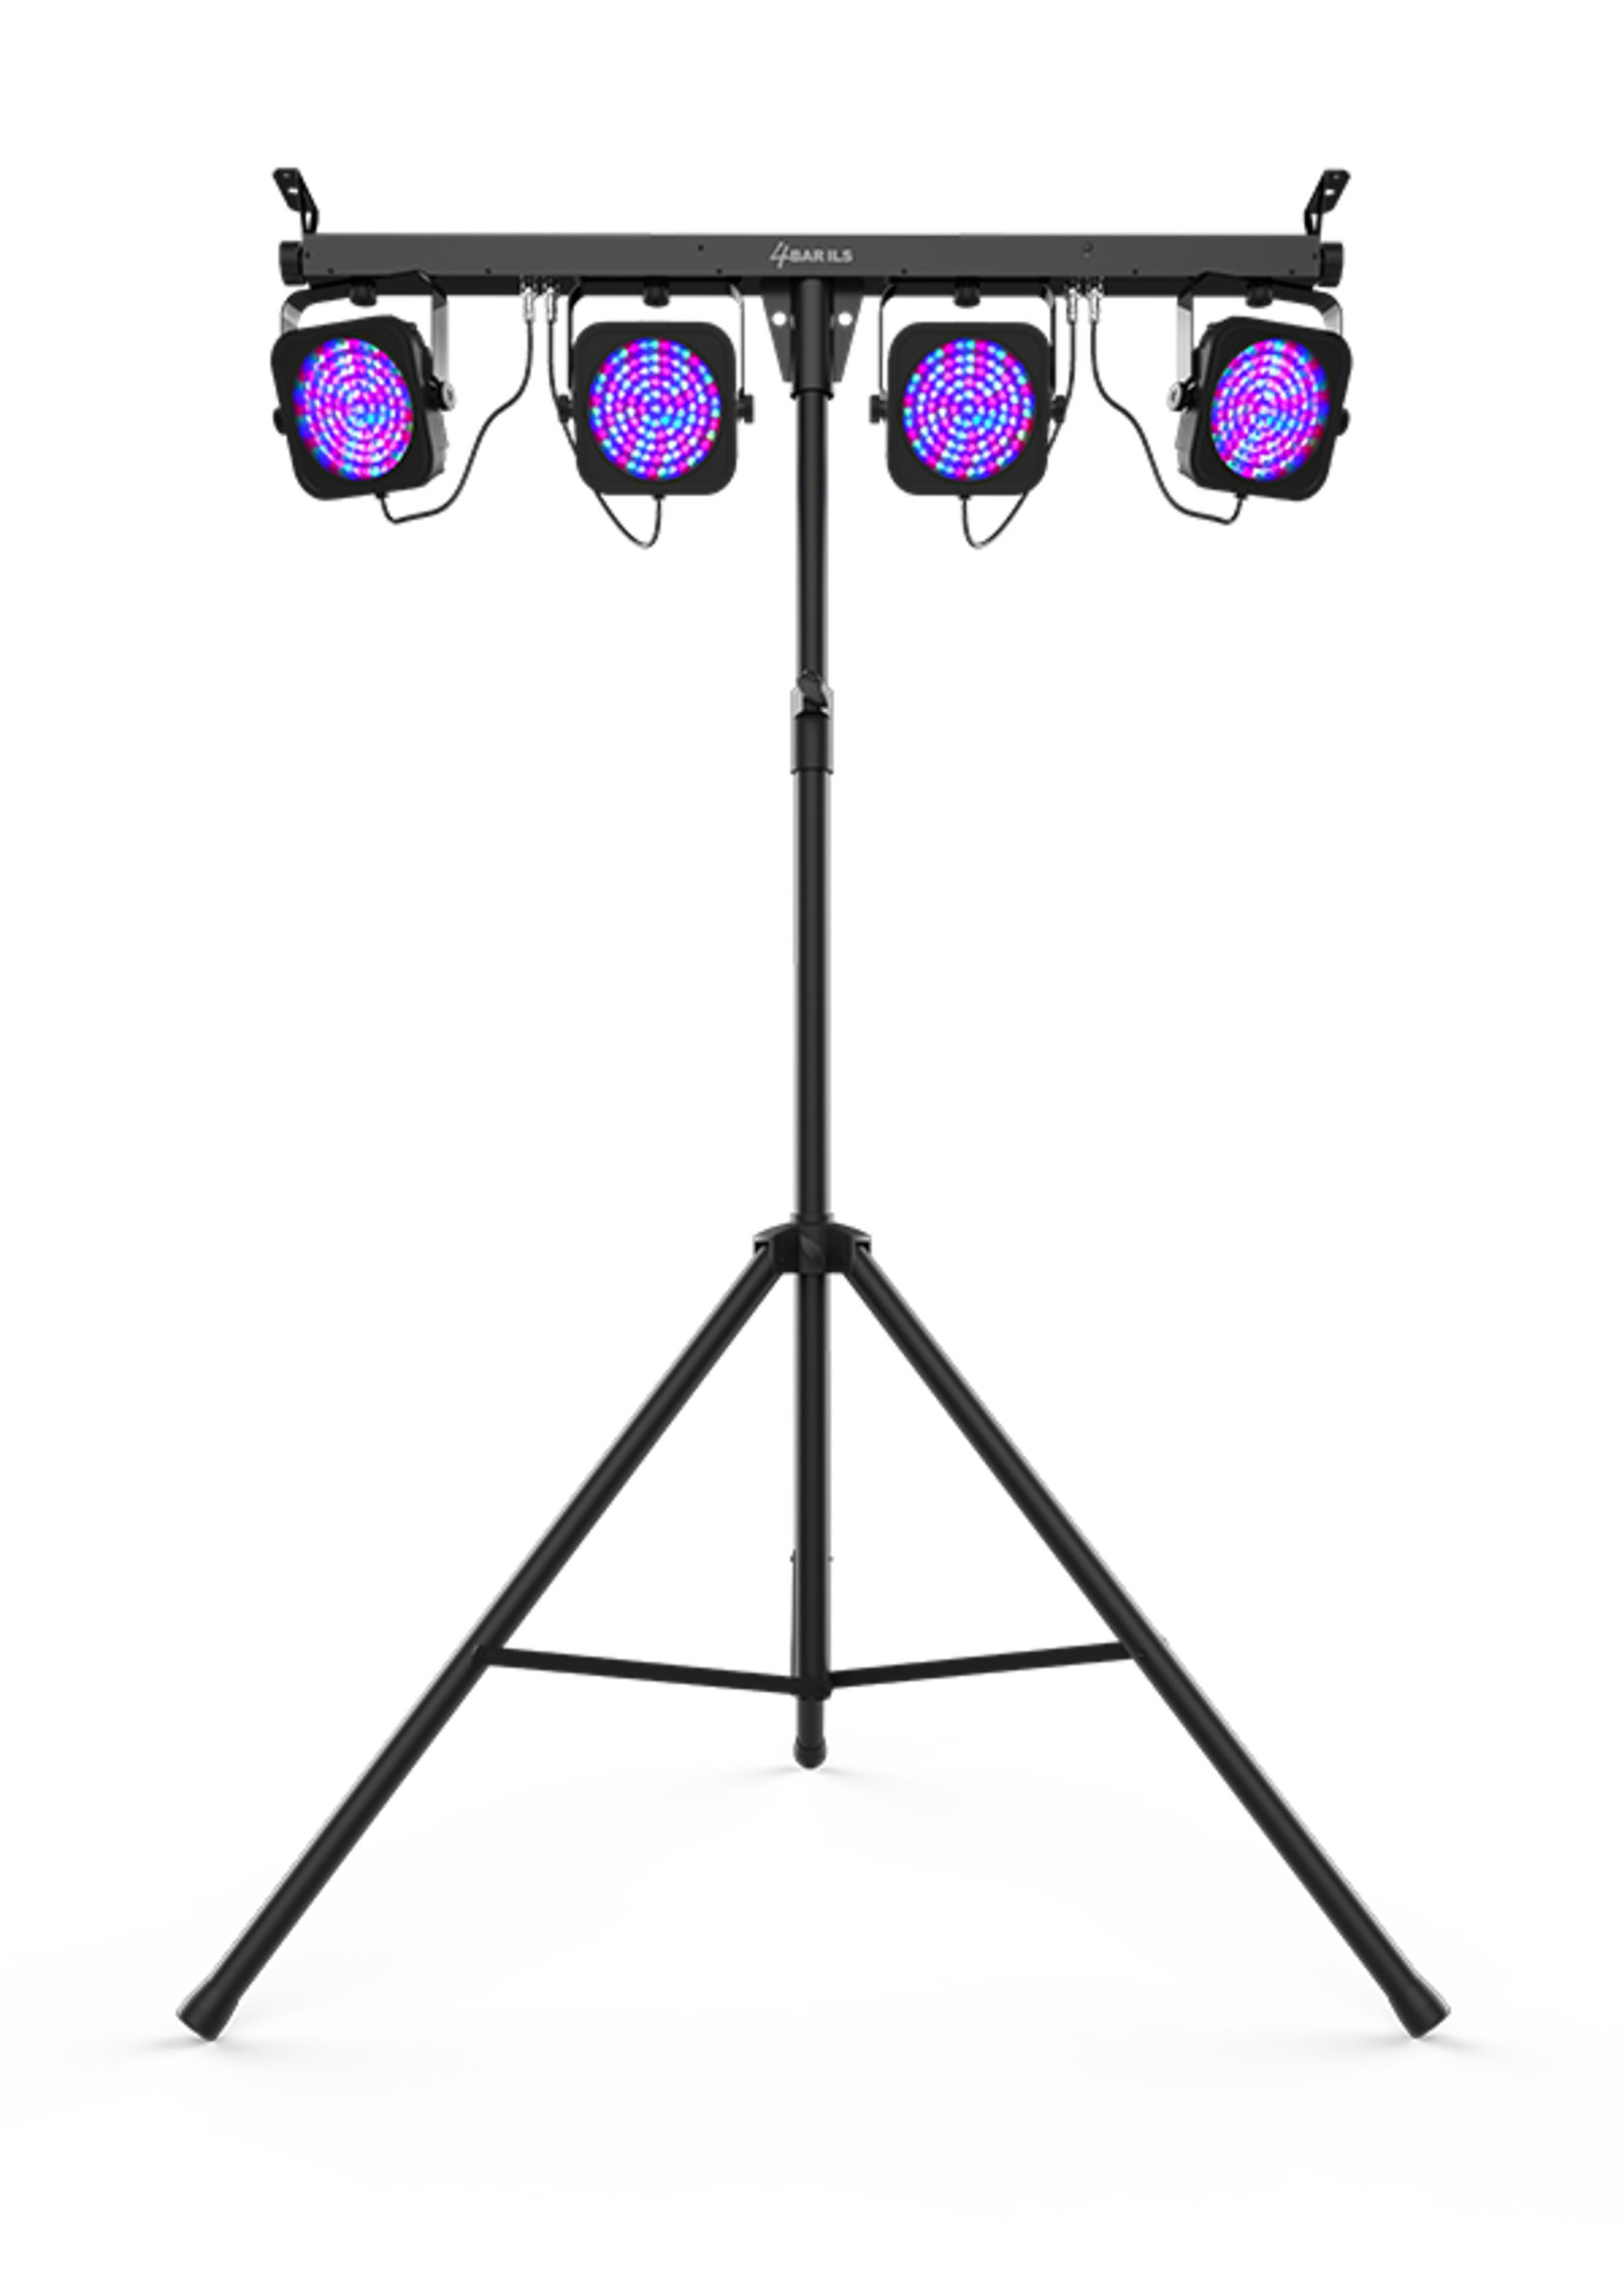 Chauvet DJ Chauvet 4BAR ILS LED Lighting System with Stand and Bag